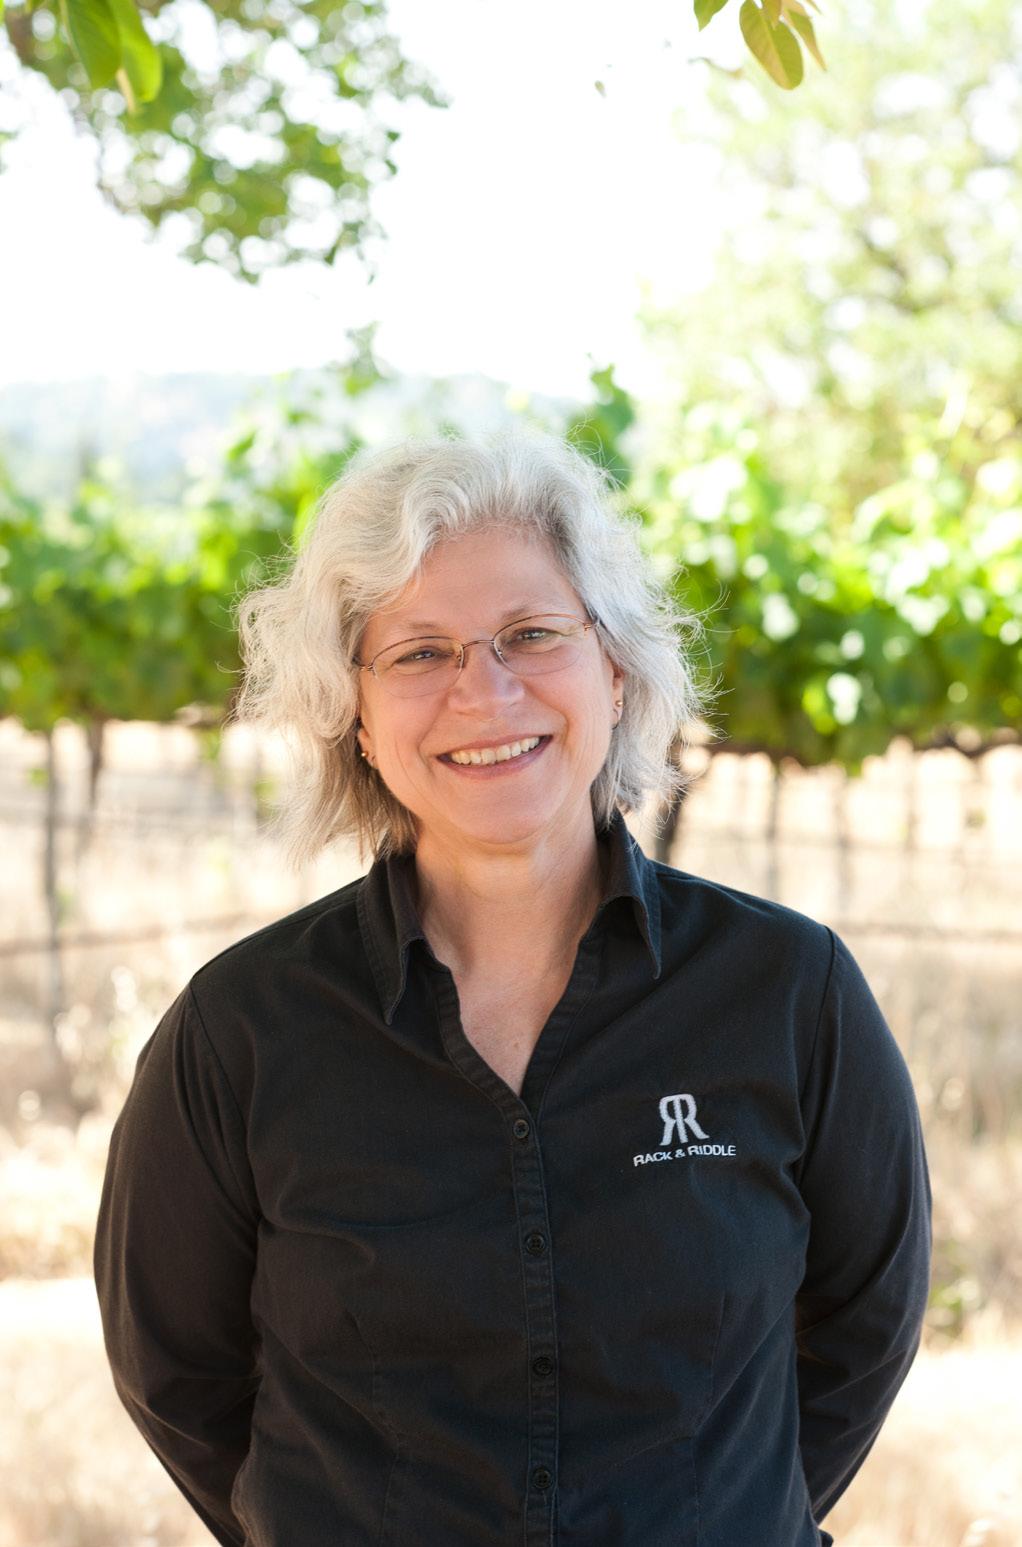 The Fourth Sister Breathless wines are lovingly crafted by the talented winemaking hand of Penny Gadd-Coster (the honorary 4th sister).